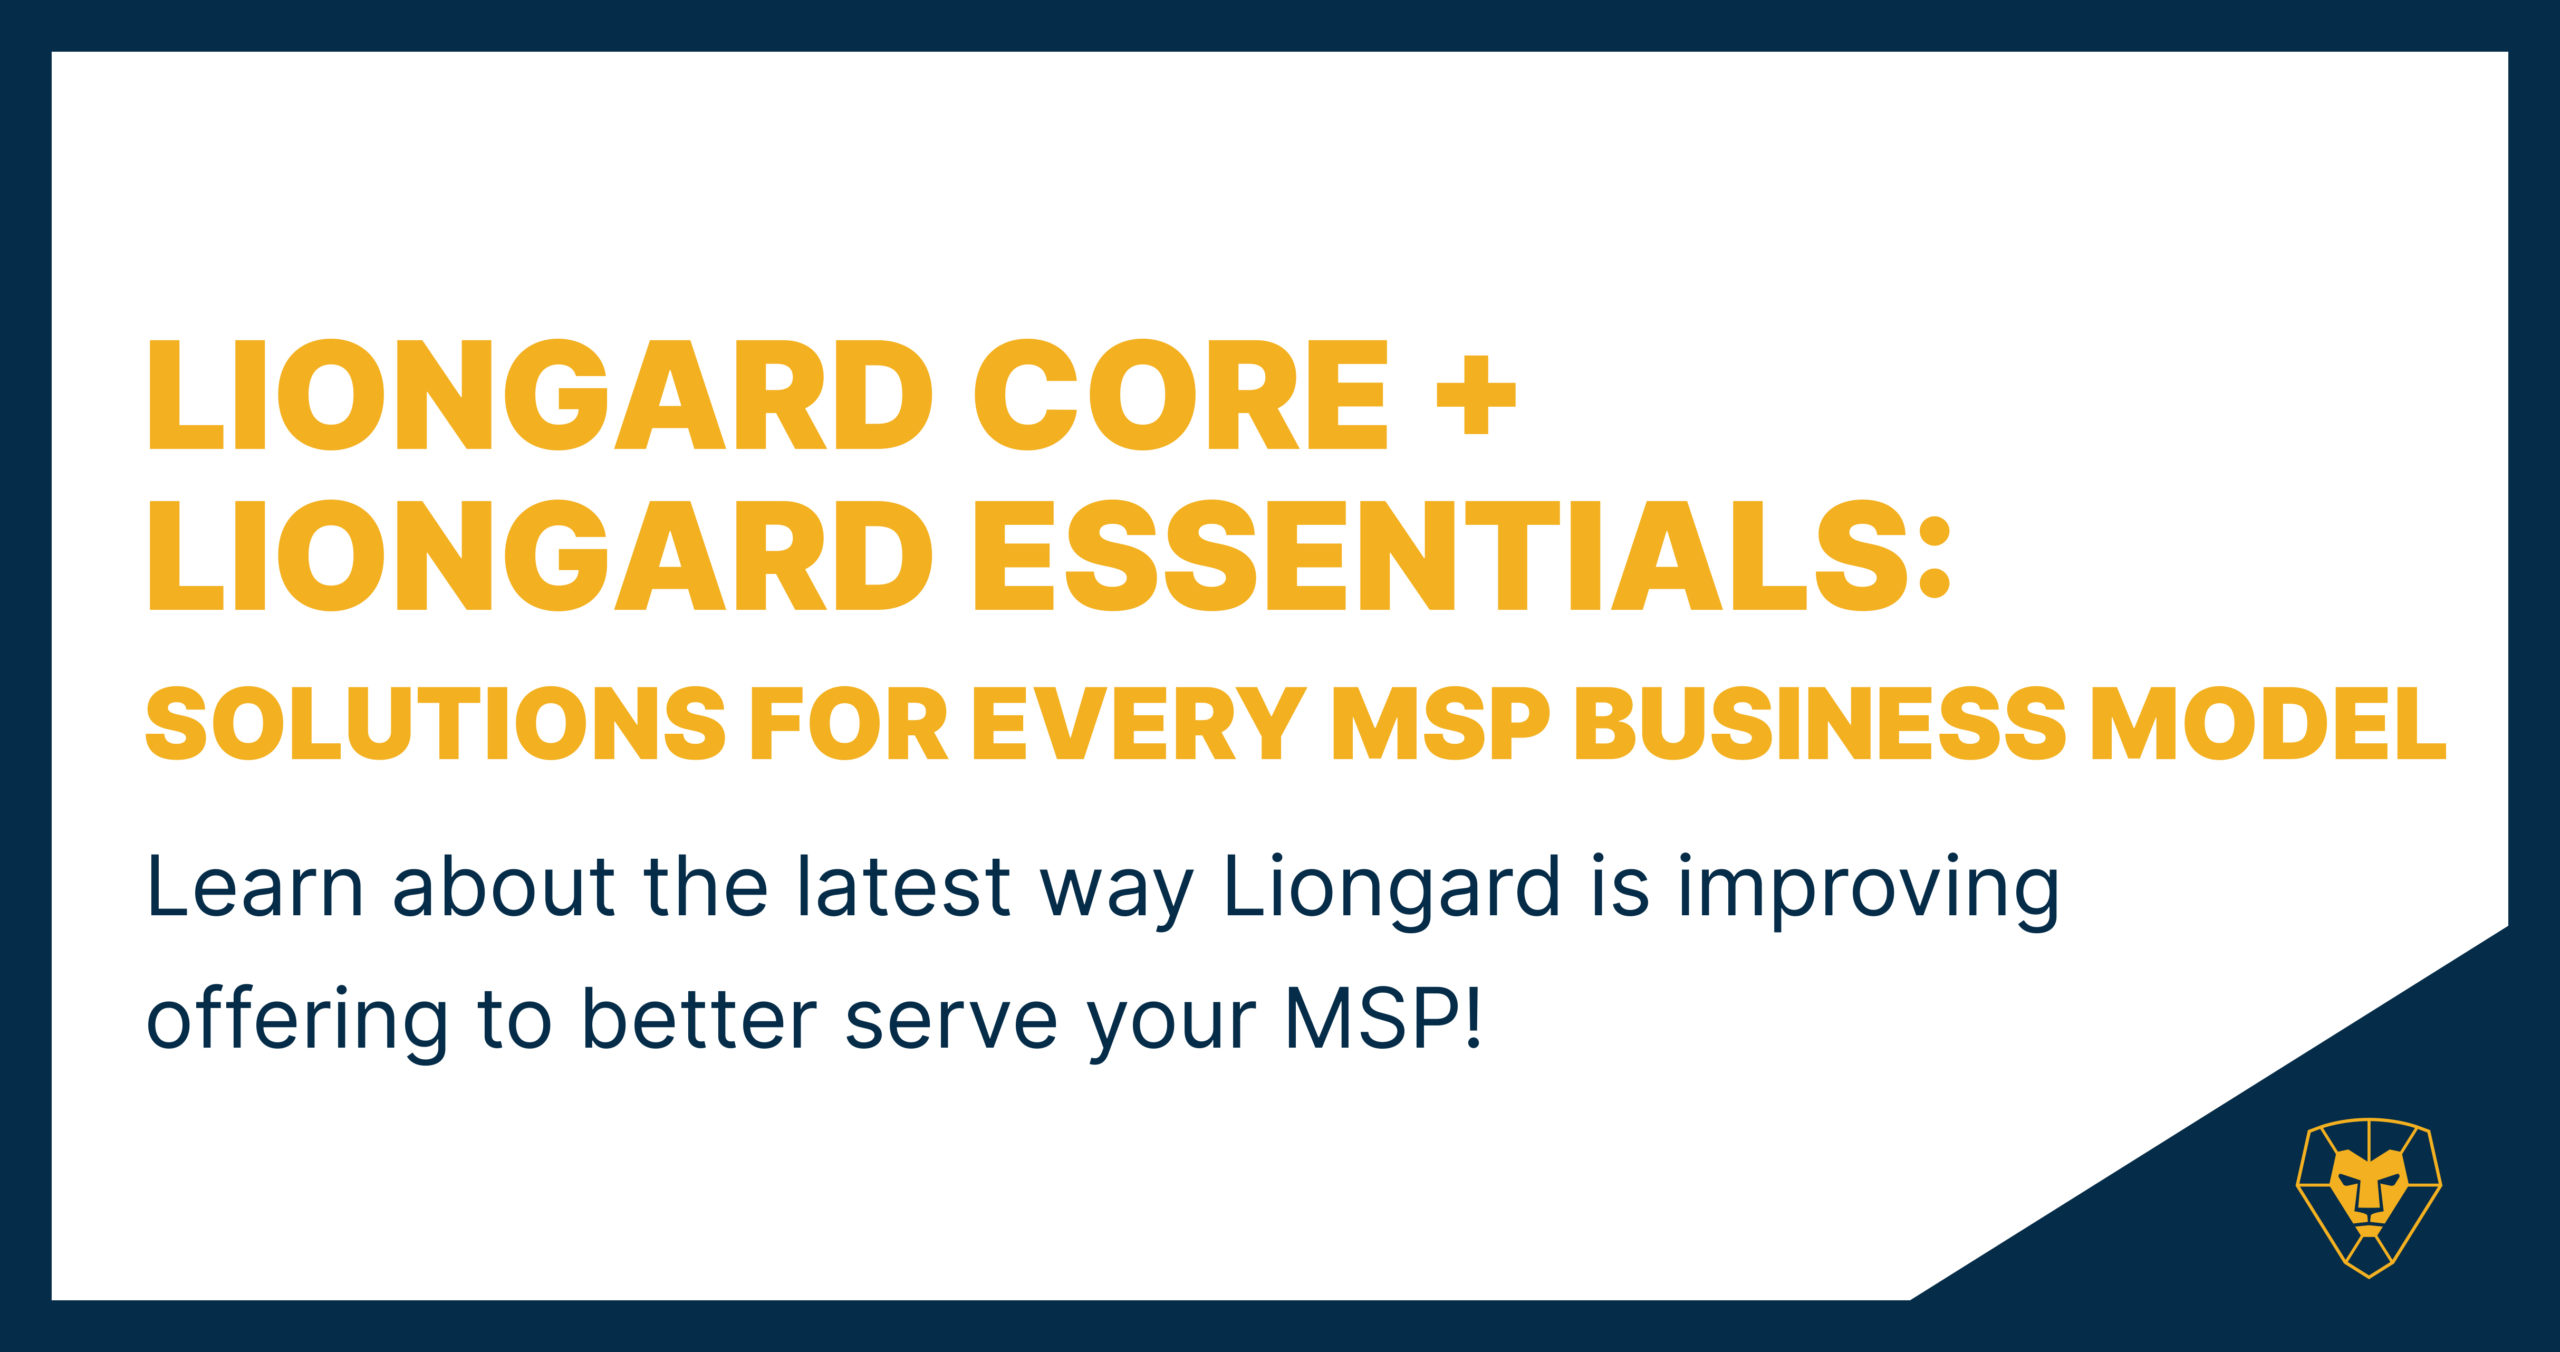 Liongard Core + Liongard Essentials Services to fit every MSP business model